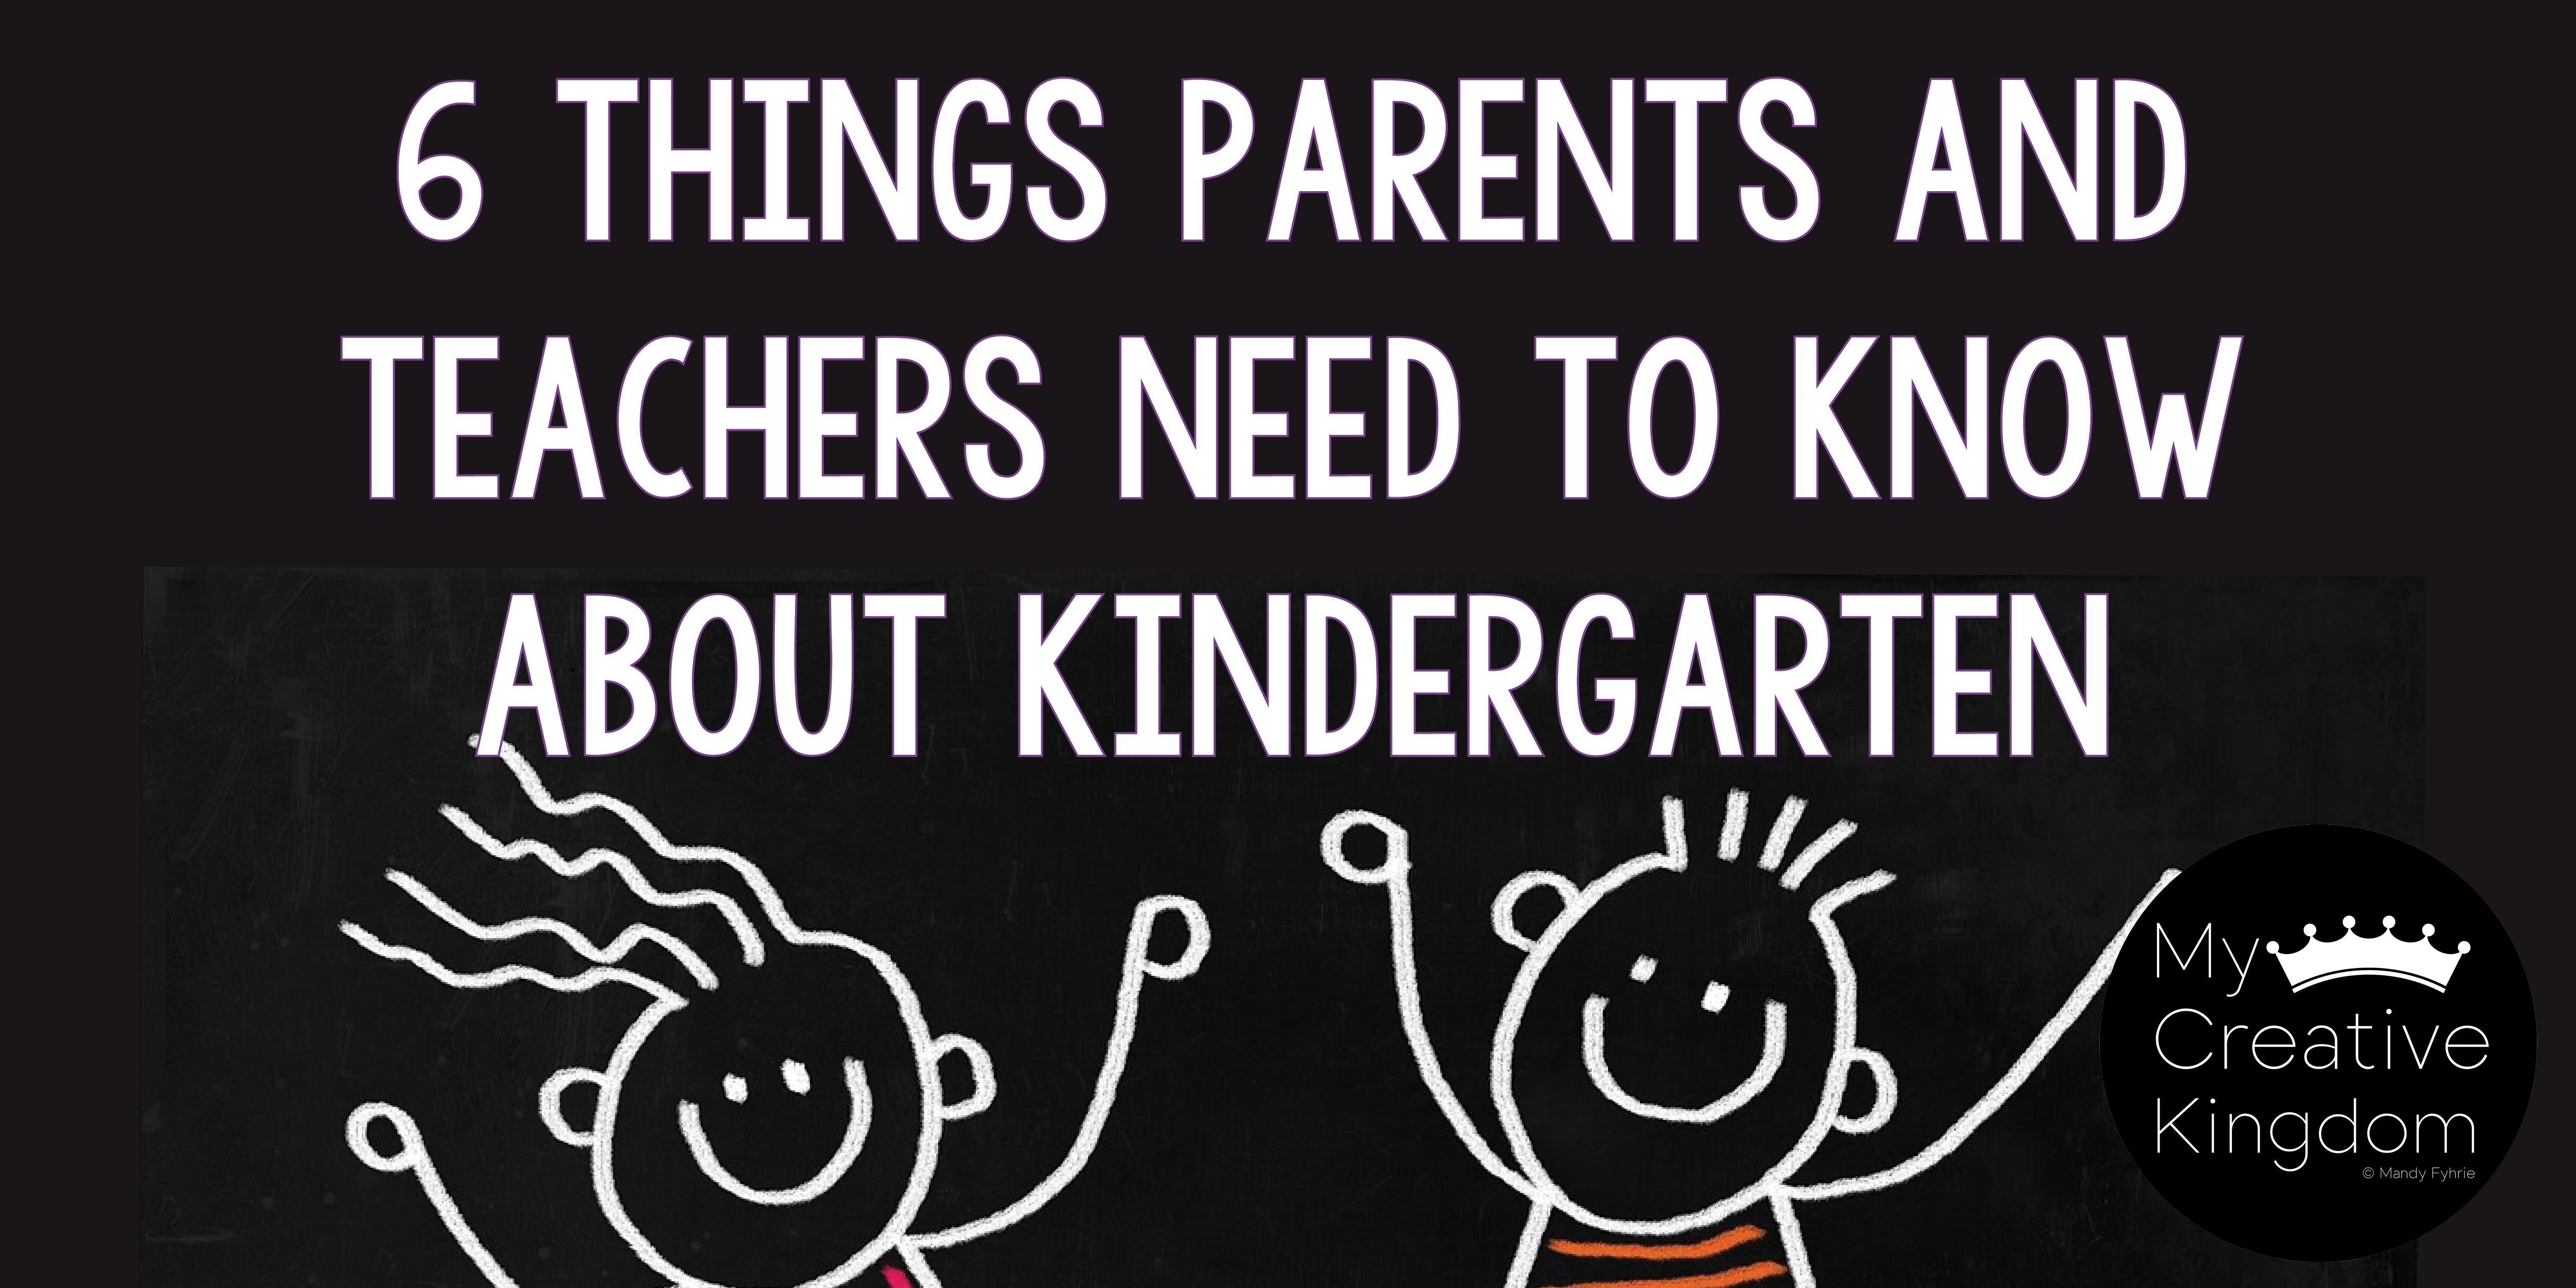 6 Things Parents and Teachers Need to Know About Kindergarten